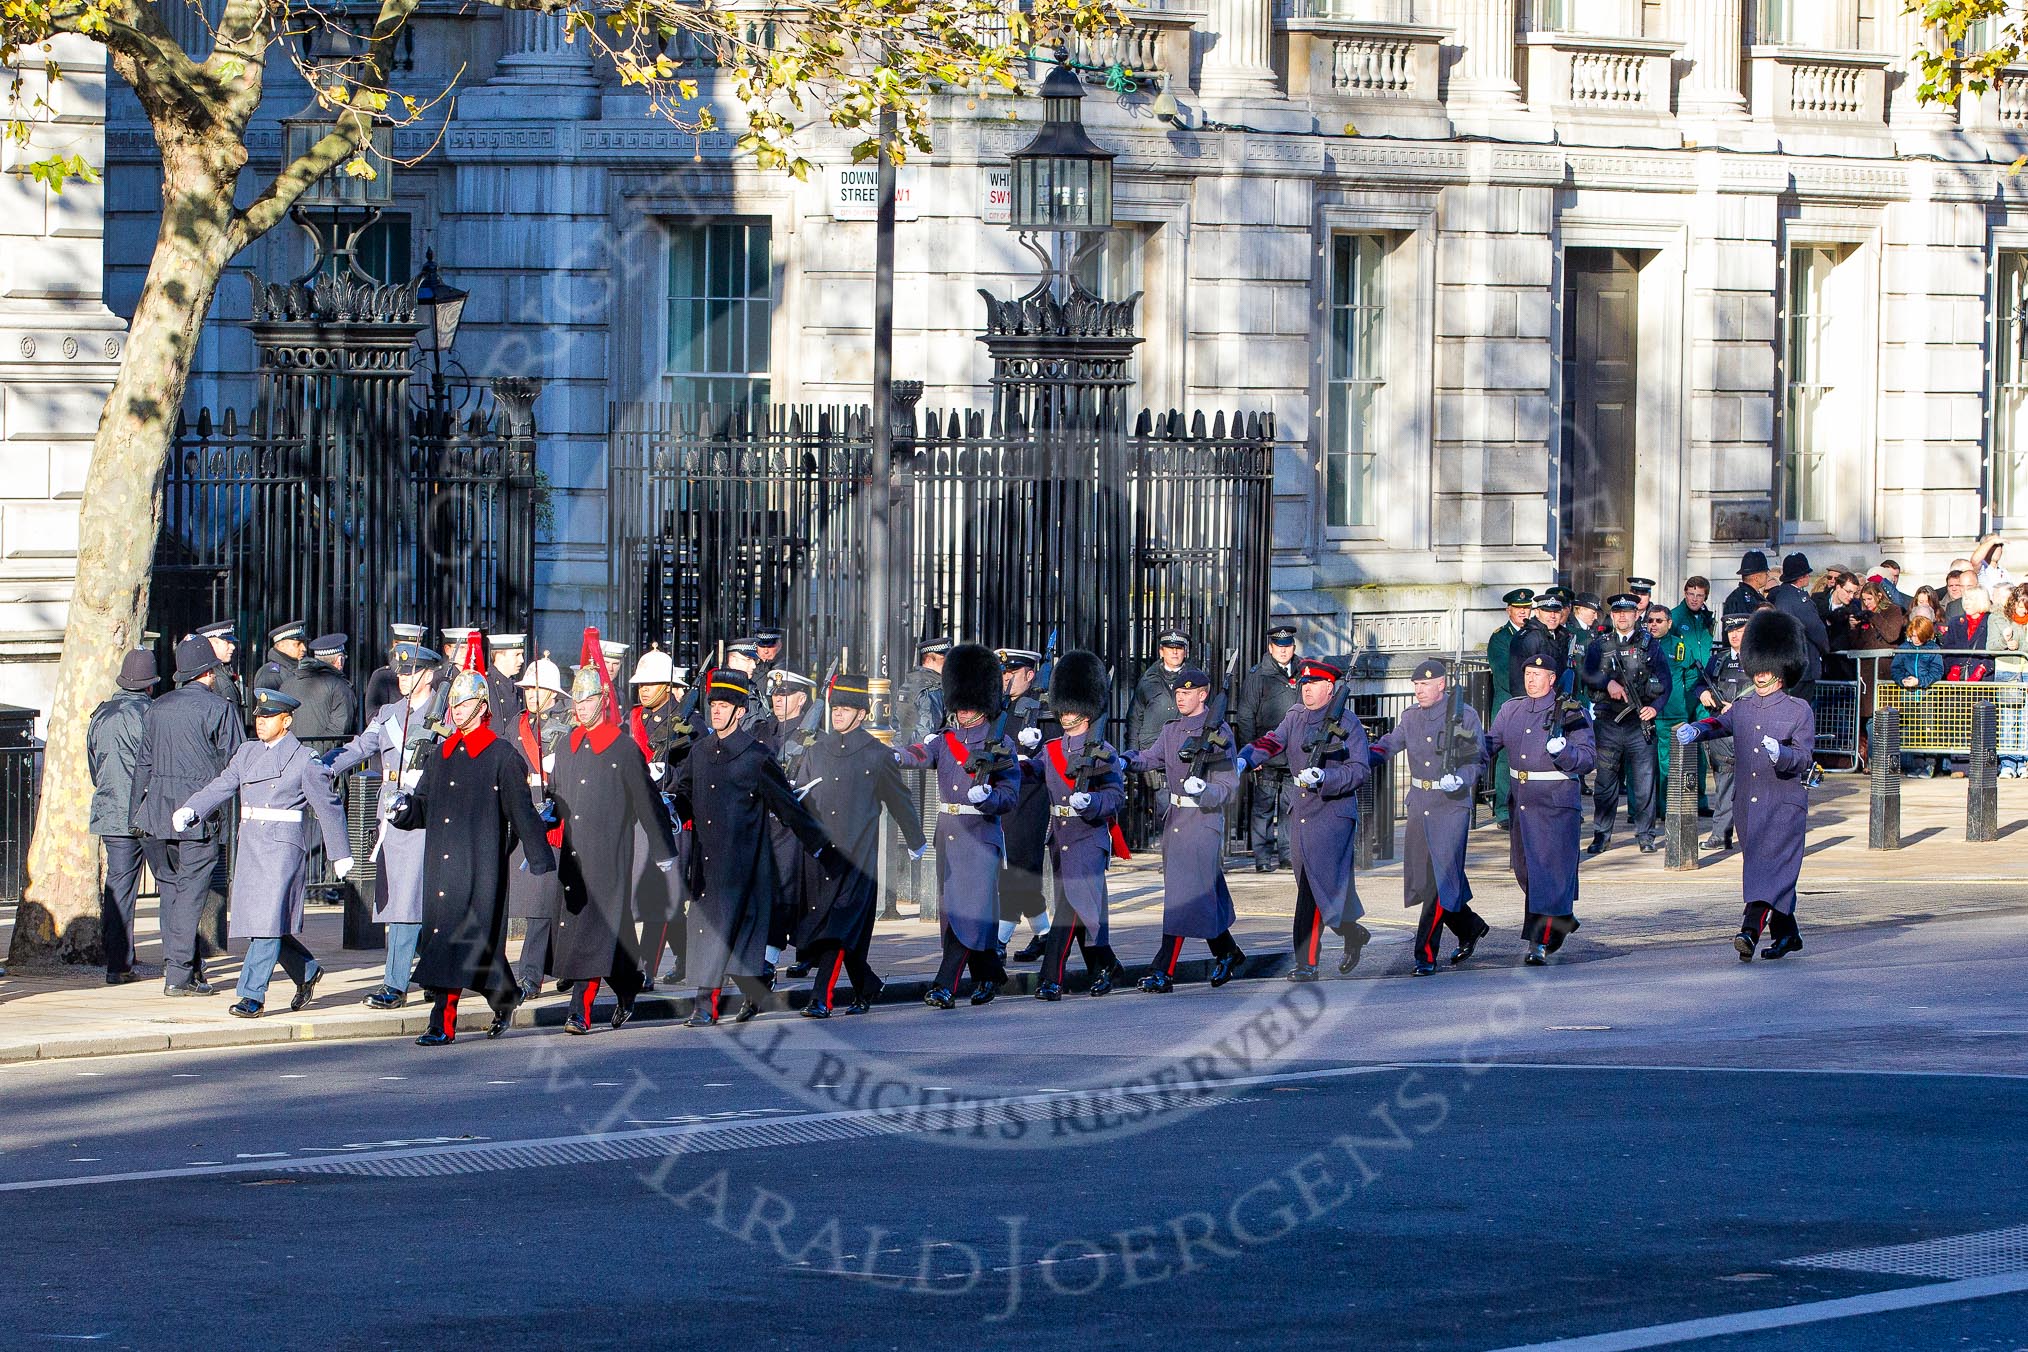 Detachments of various services on the way to the Cenotaph: RAF, Household Cavalry, Royal Marines.